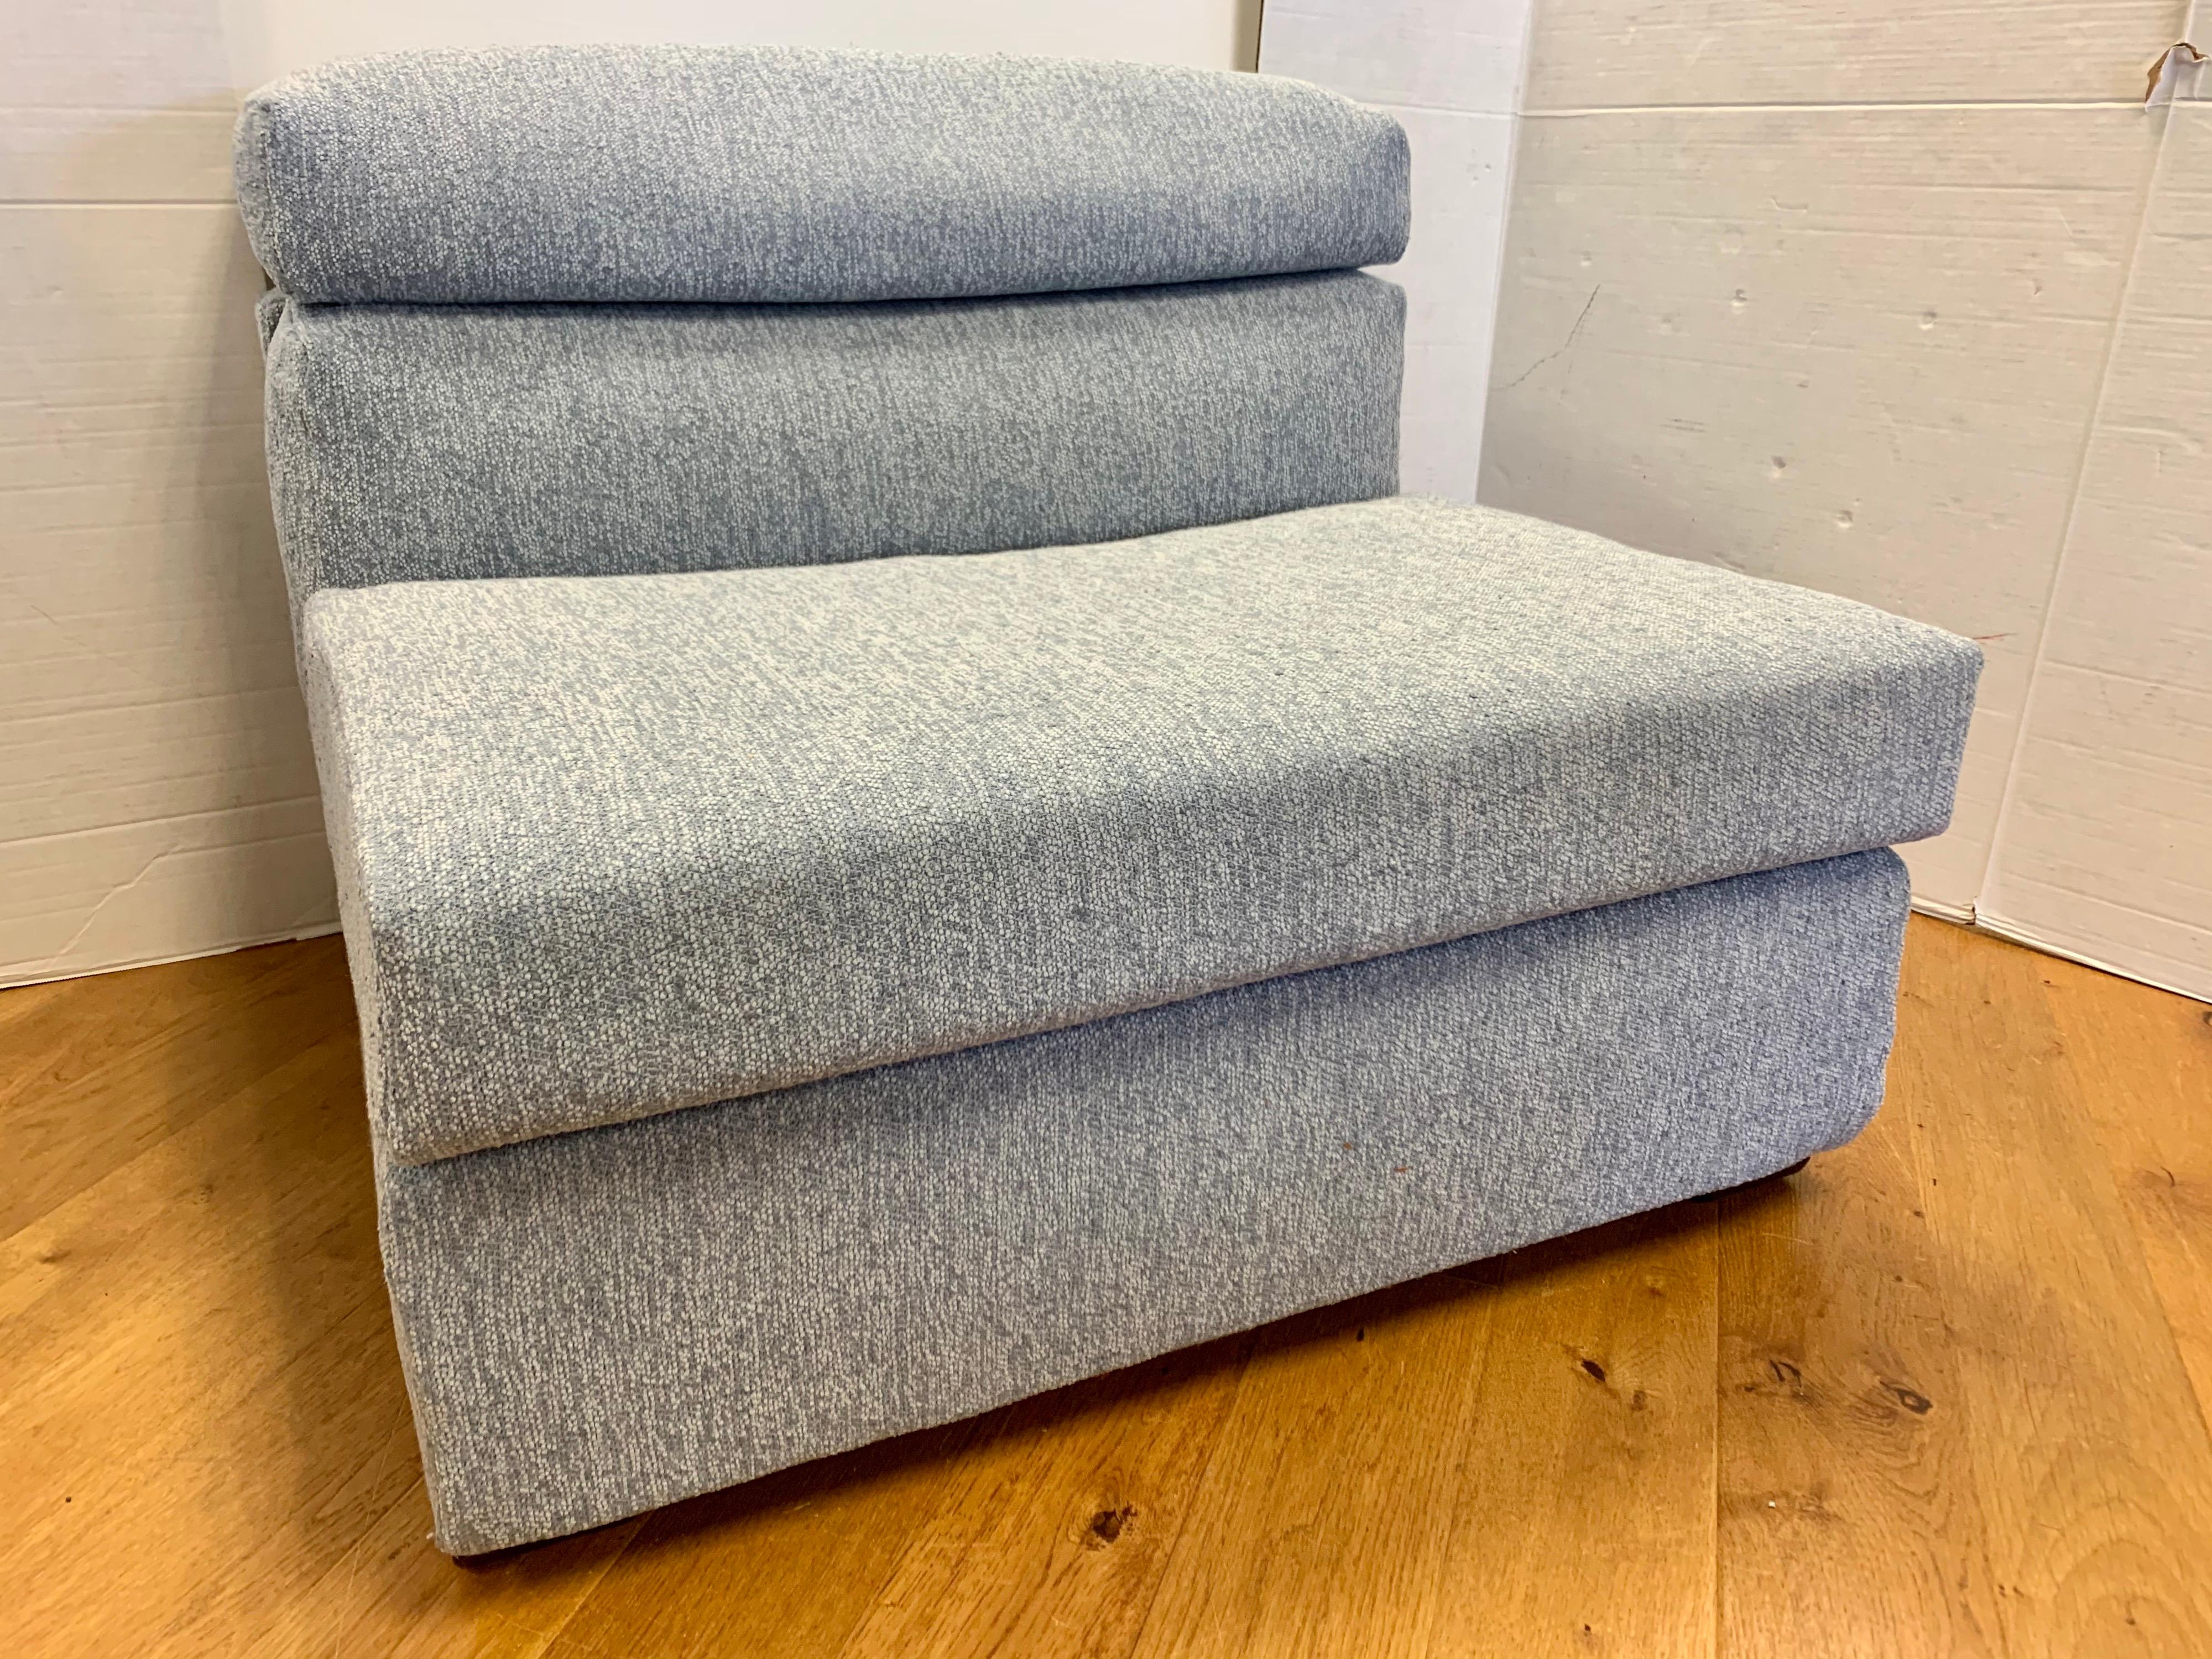 Rare B&B Italia Erasmo chair that our team of upholsterers just redid in a stunning Donghia blue and gray boucle fabric. All B&B Italia hallmarks present. One of the most comfortable lounge chairs you will ever sit in.
Looks brand new. From the